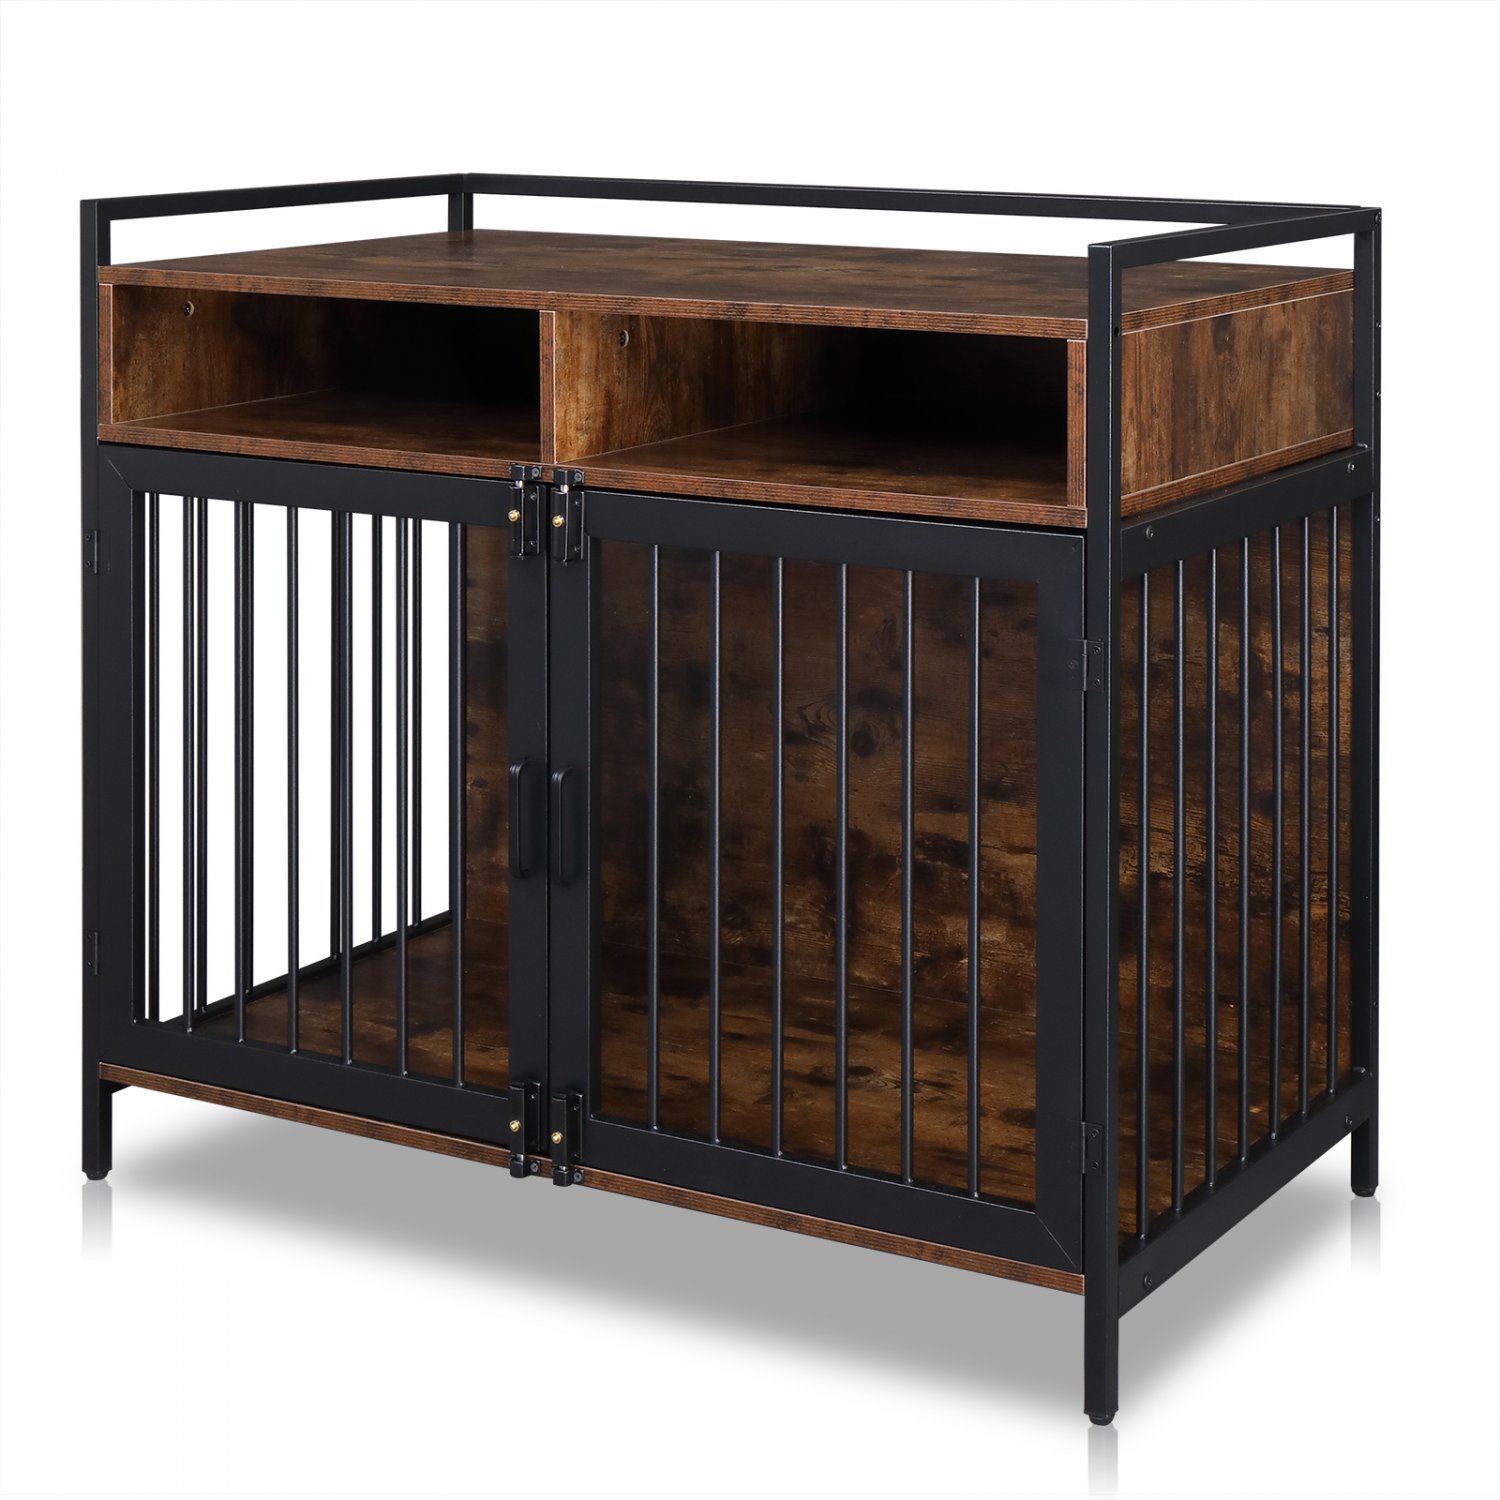 38.6" Metal Heavy Duty Super Sturdy Dog Cage with Storage and Anti-chew Features Rustic Brown